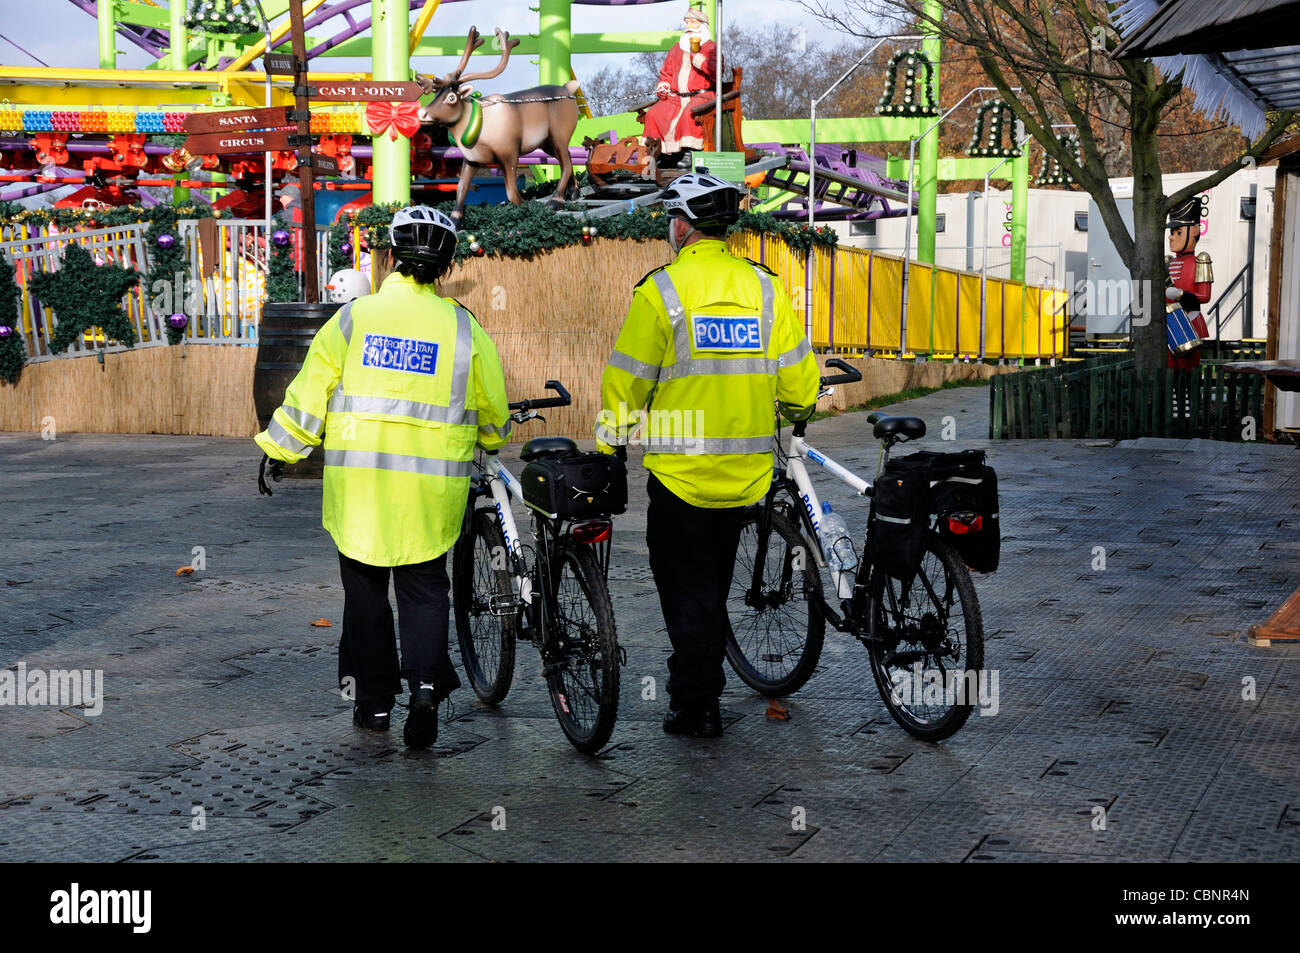 Metropolitan Police Officers with bikes at the Winter Wonderland funfair Stock Photo